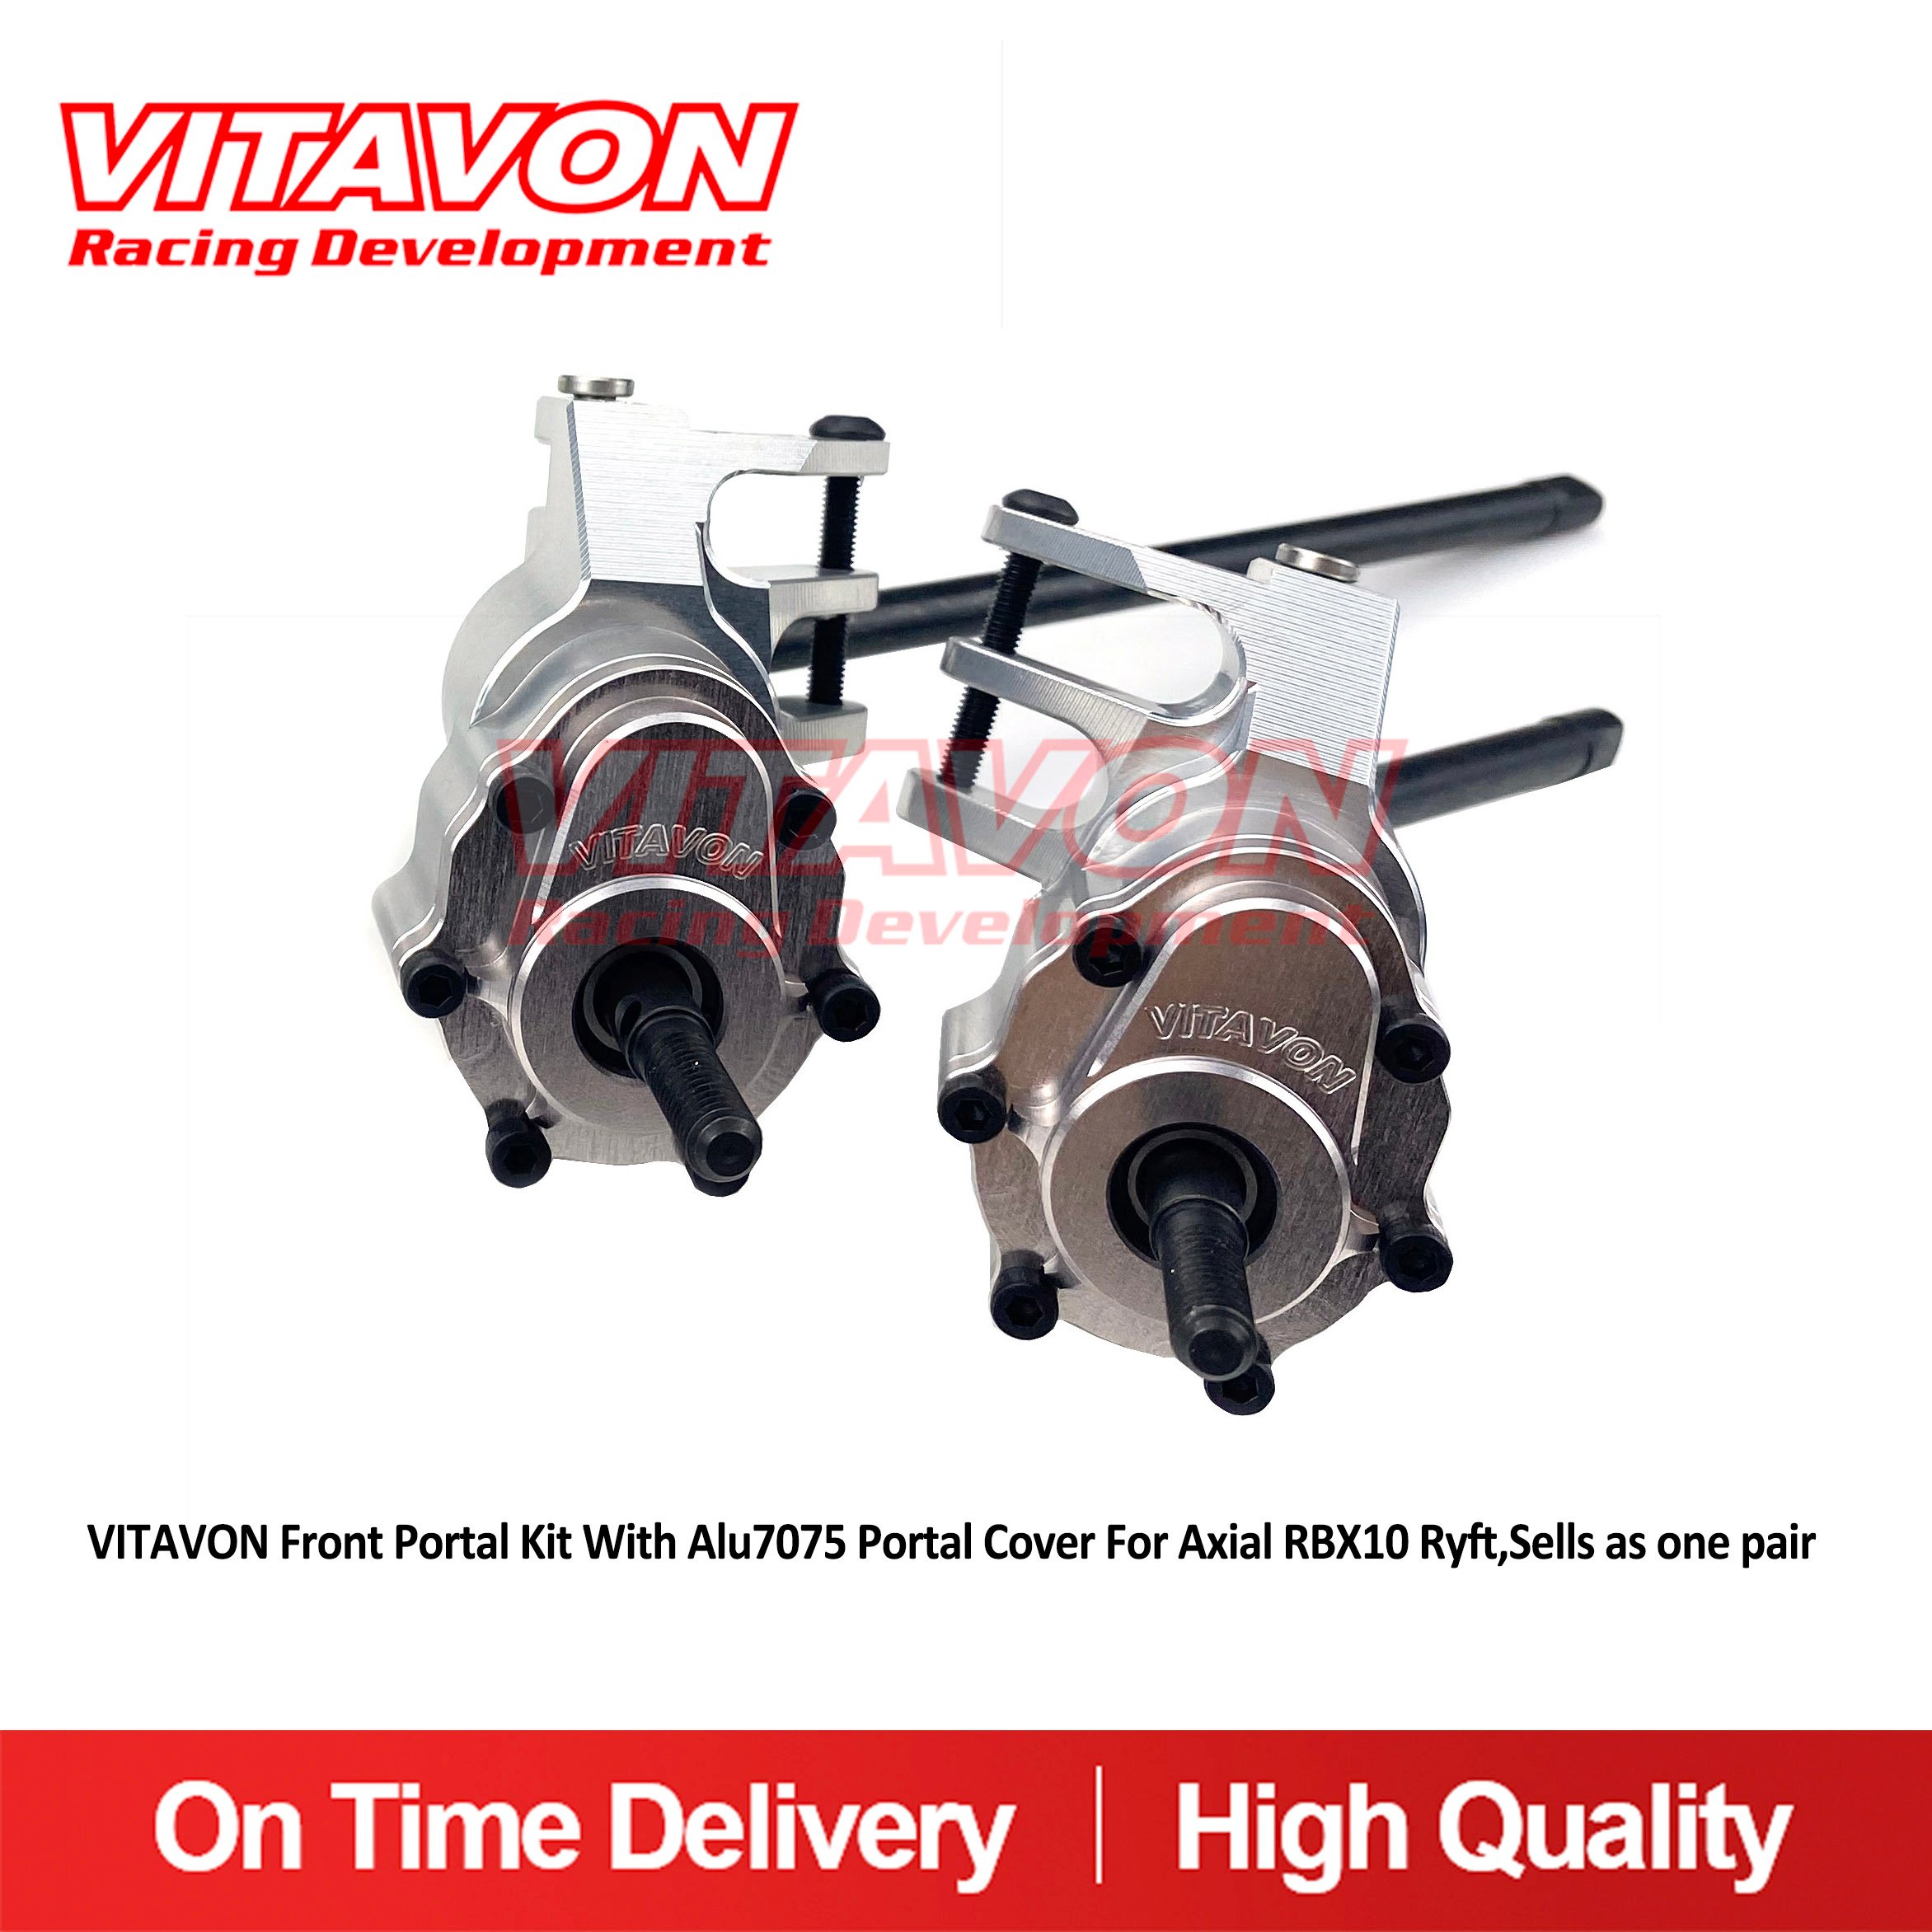 VITAVON Front Portal Kit With Alu7075 Portal Cover For Axial RBX10 Ryft,Sells as one pair